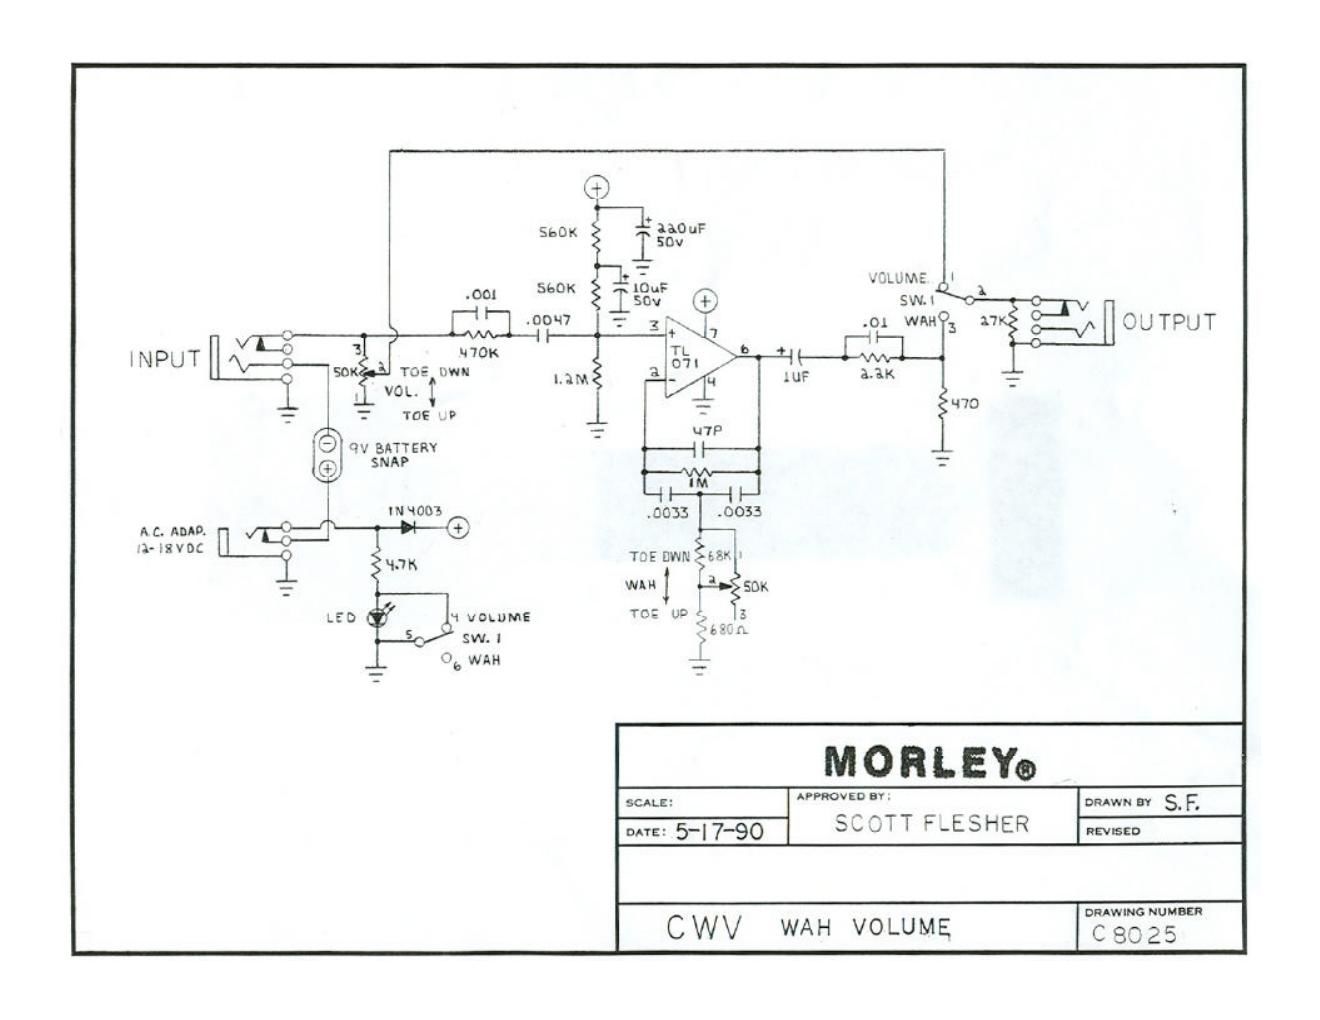 Morley CWV Compact Wah Volume Schematic